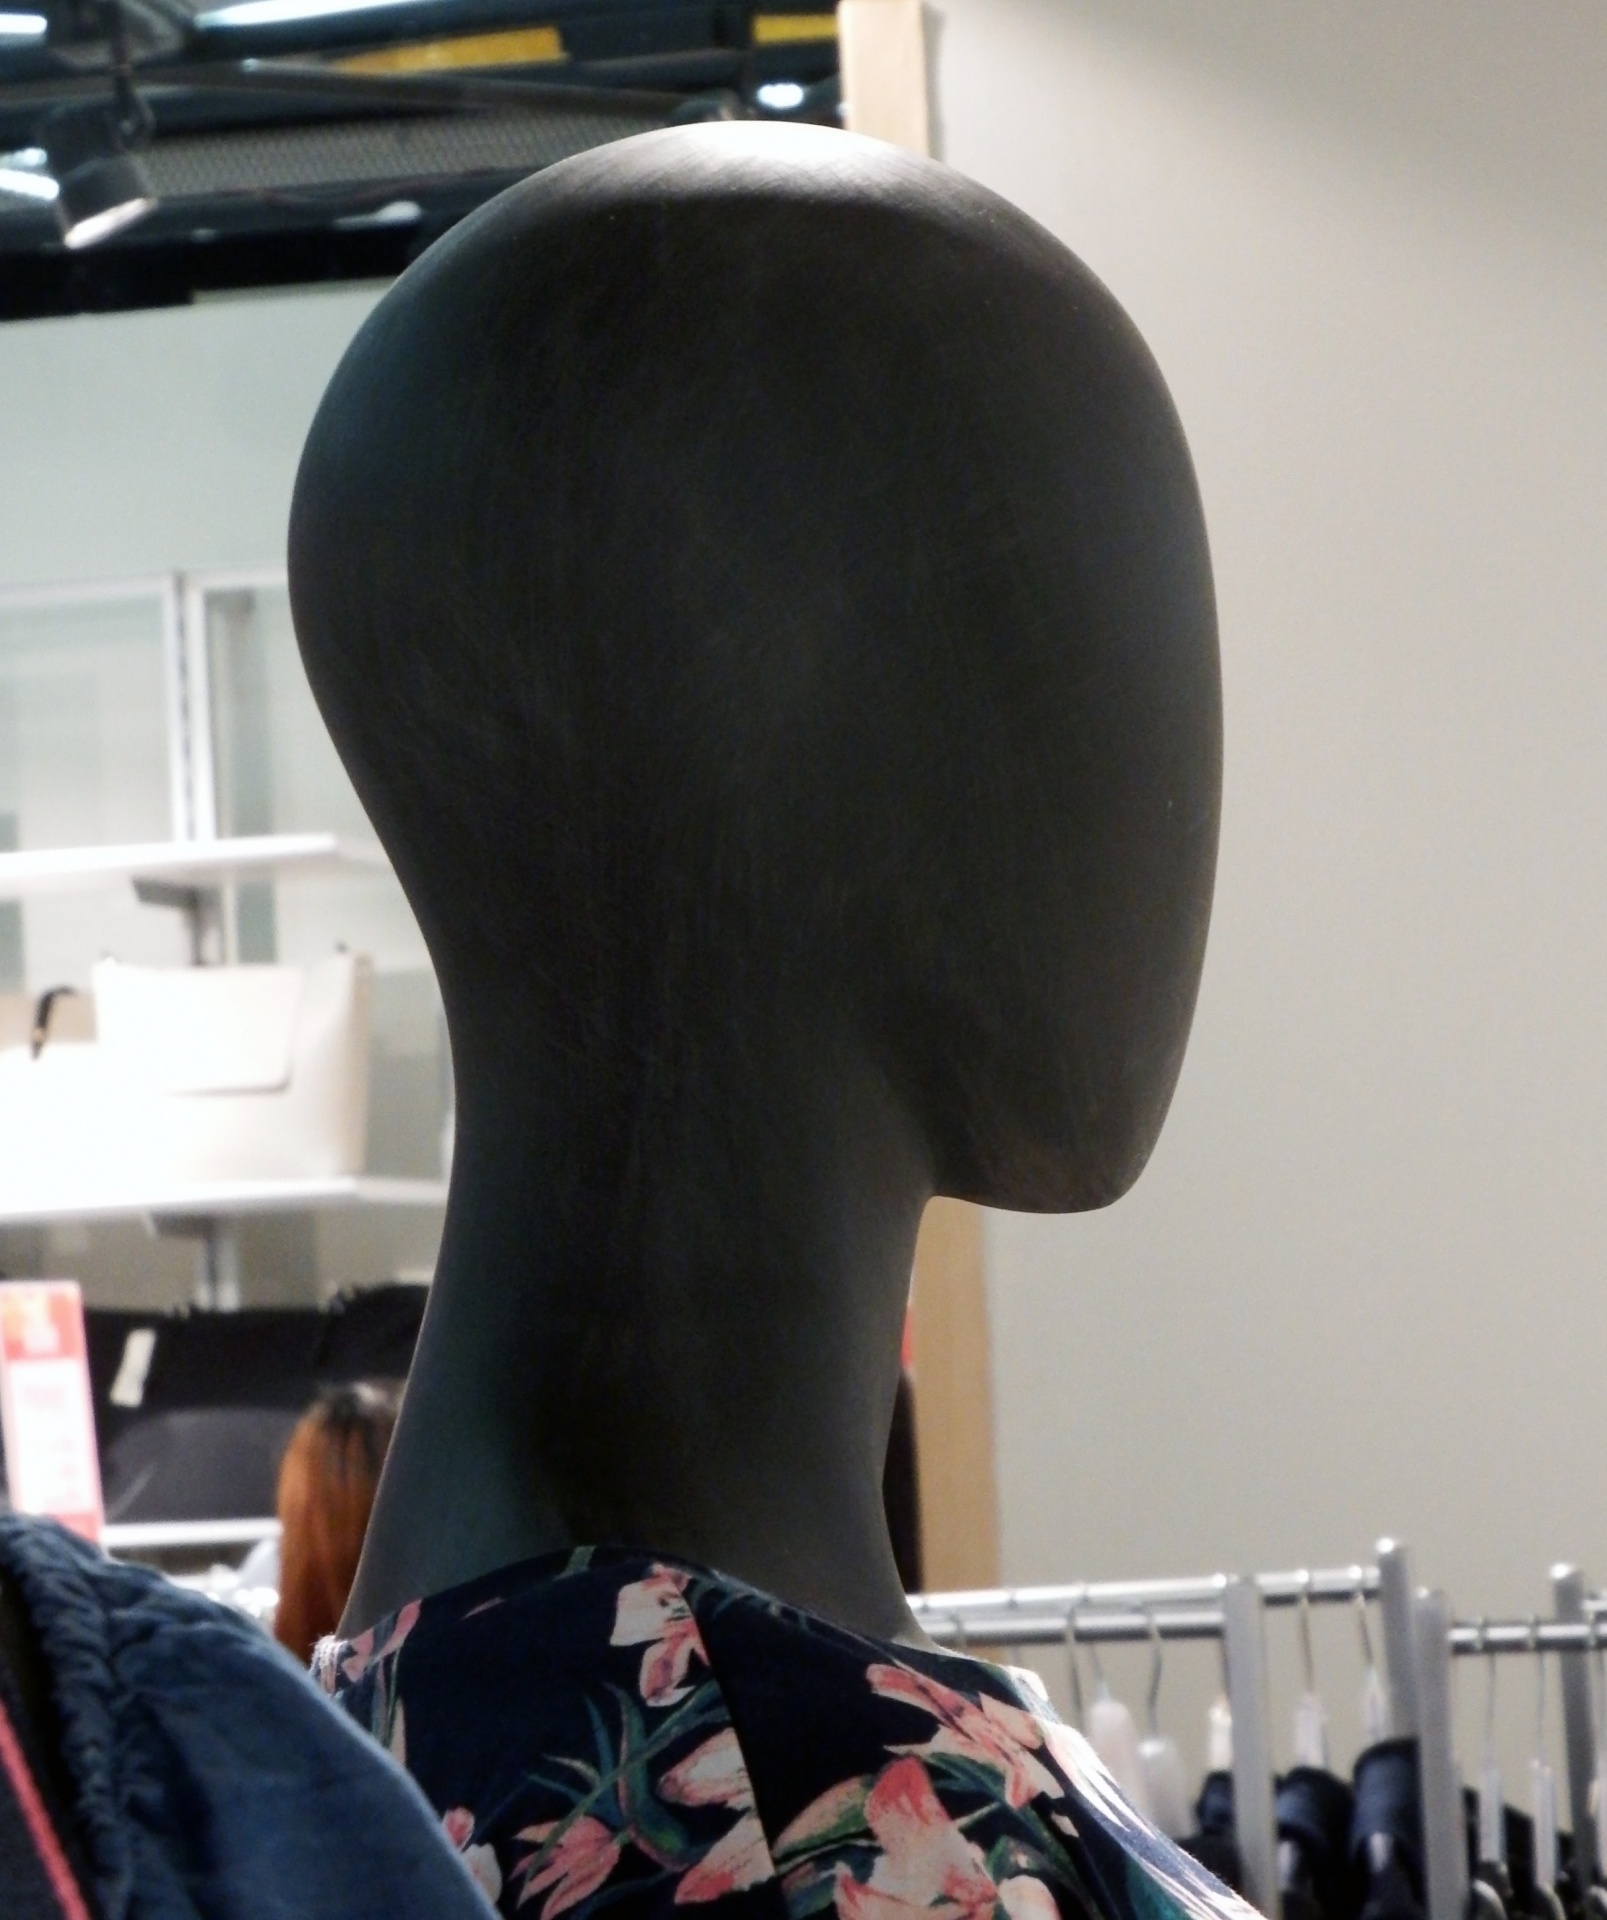 Female Bald Mannequin In A Store